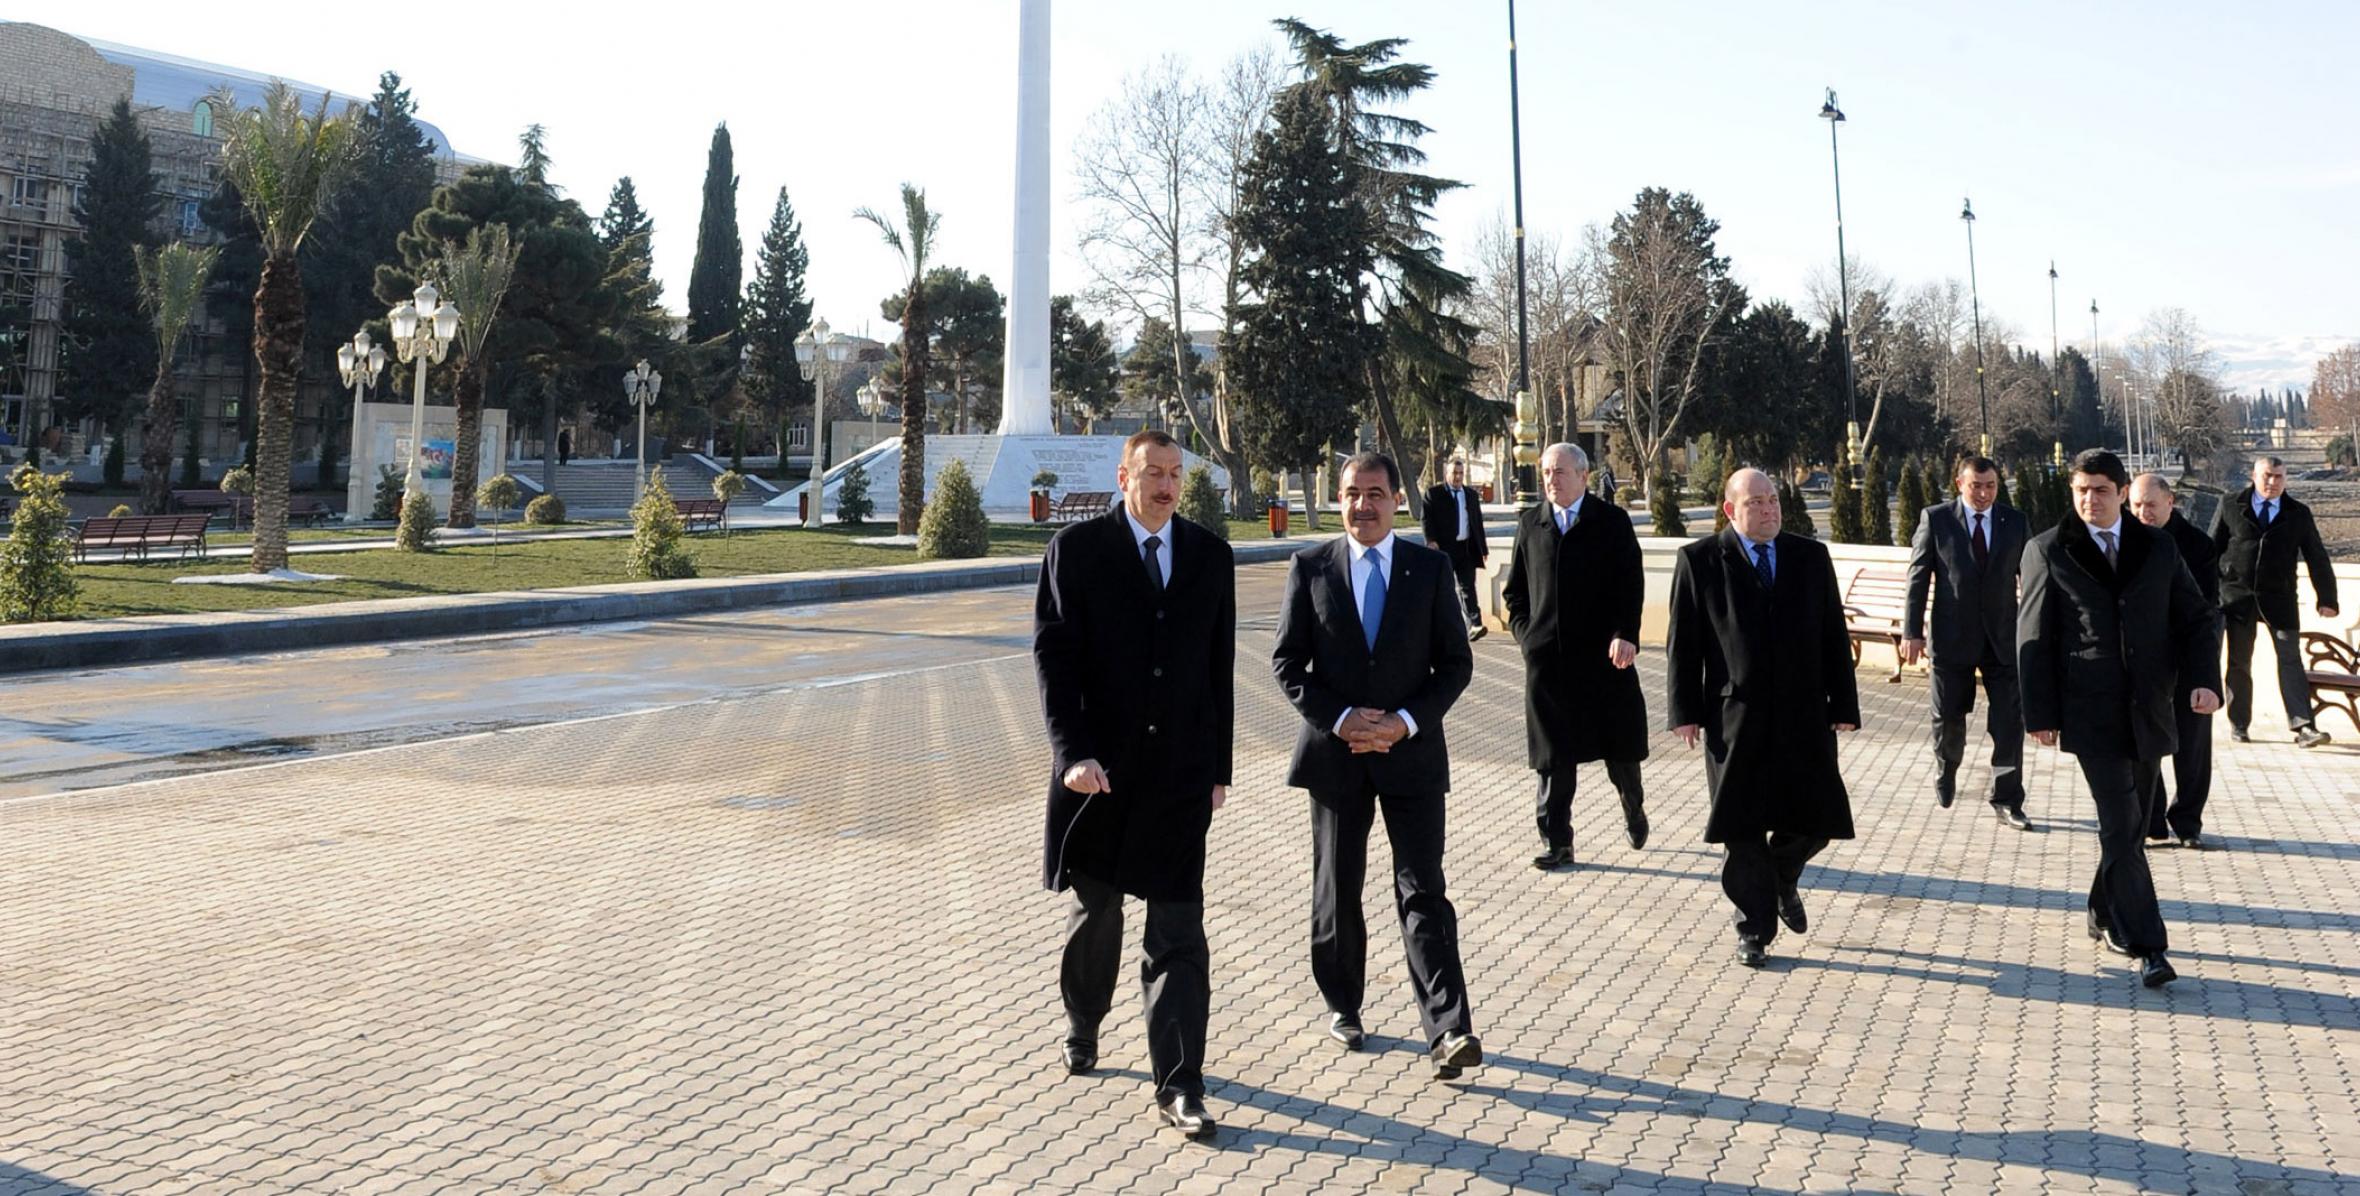 Ilham Aliyev got familiarized with the work carried out in Ganja’s Flag Square